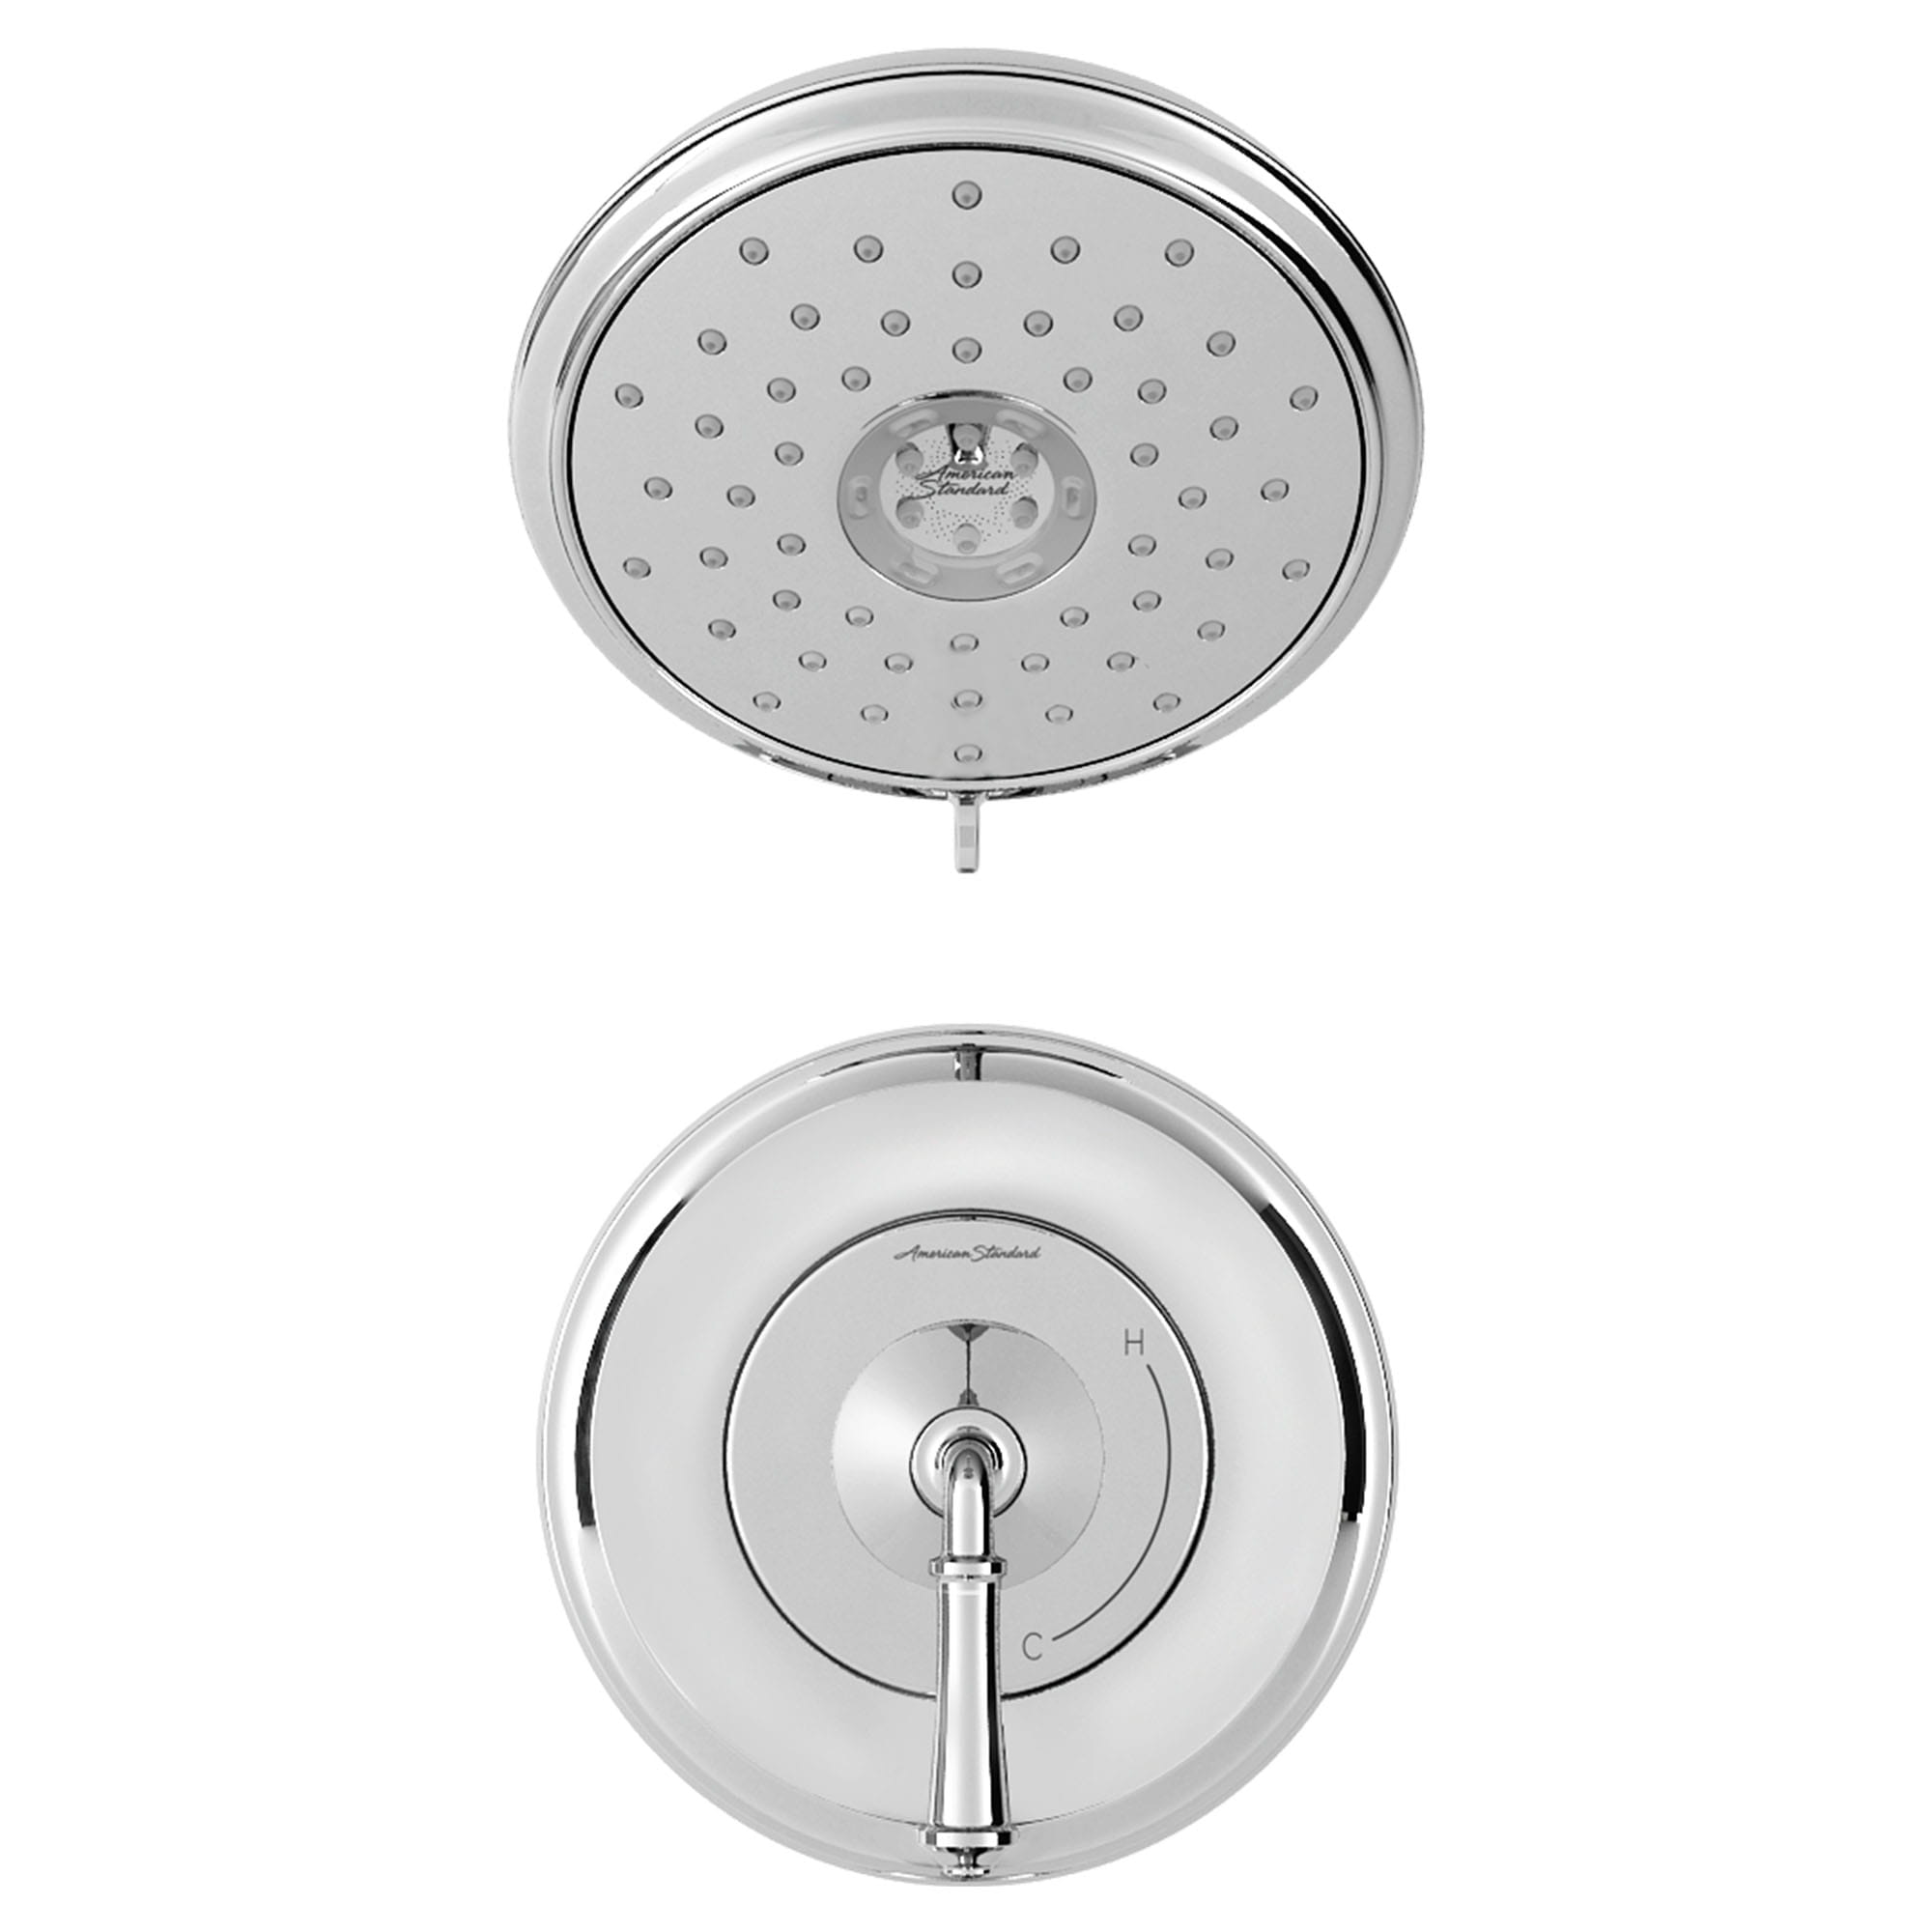 Delancey 25 gpm 94 L min Shower Trim Kit With 4 Function Showerhead and Lever Handle CHROME